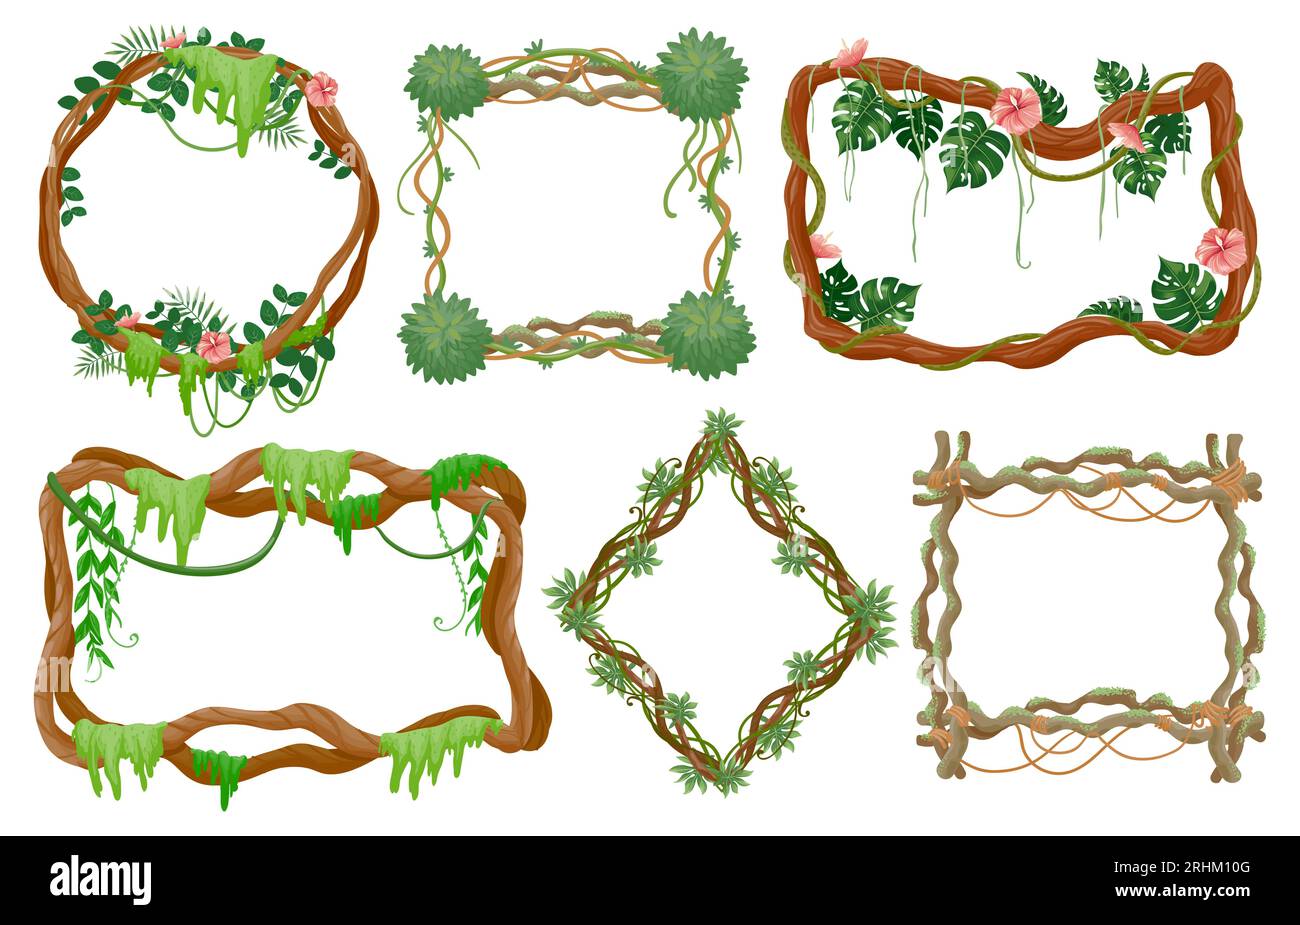 9,783 Vine Decor For Wall Images, Stock Photos, 3D objects, & Vectors